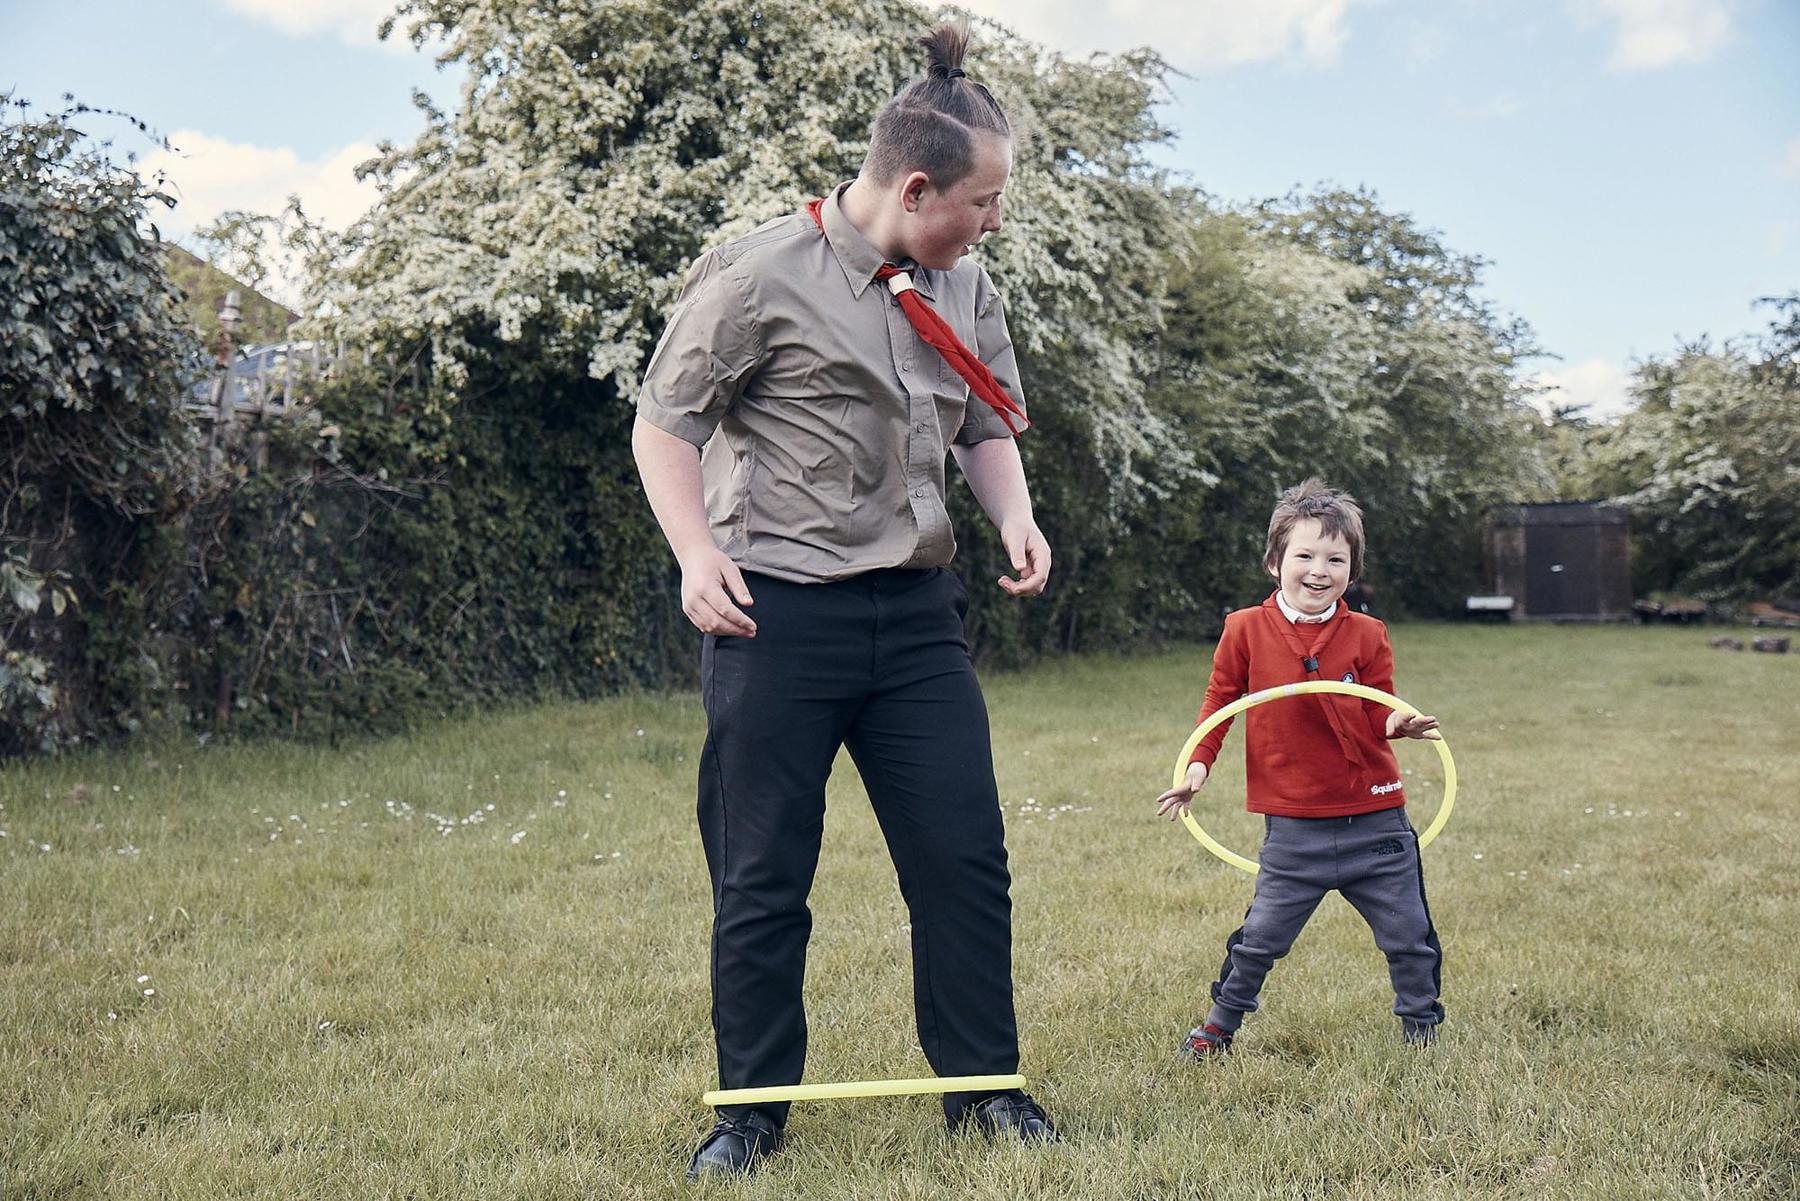 A Scout and Squirrel are stood on a field in the grass, and they are trying to hoola hoop. The Scout has the hoop around his ankles and the Squirrel is trying to hoola hoop around his waist. They are both smiling and having fun.